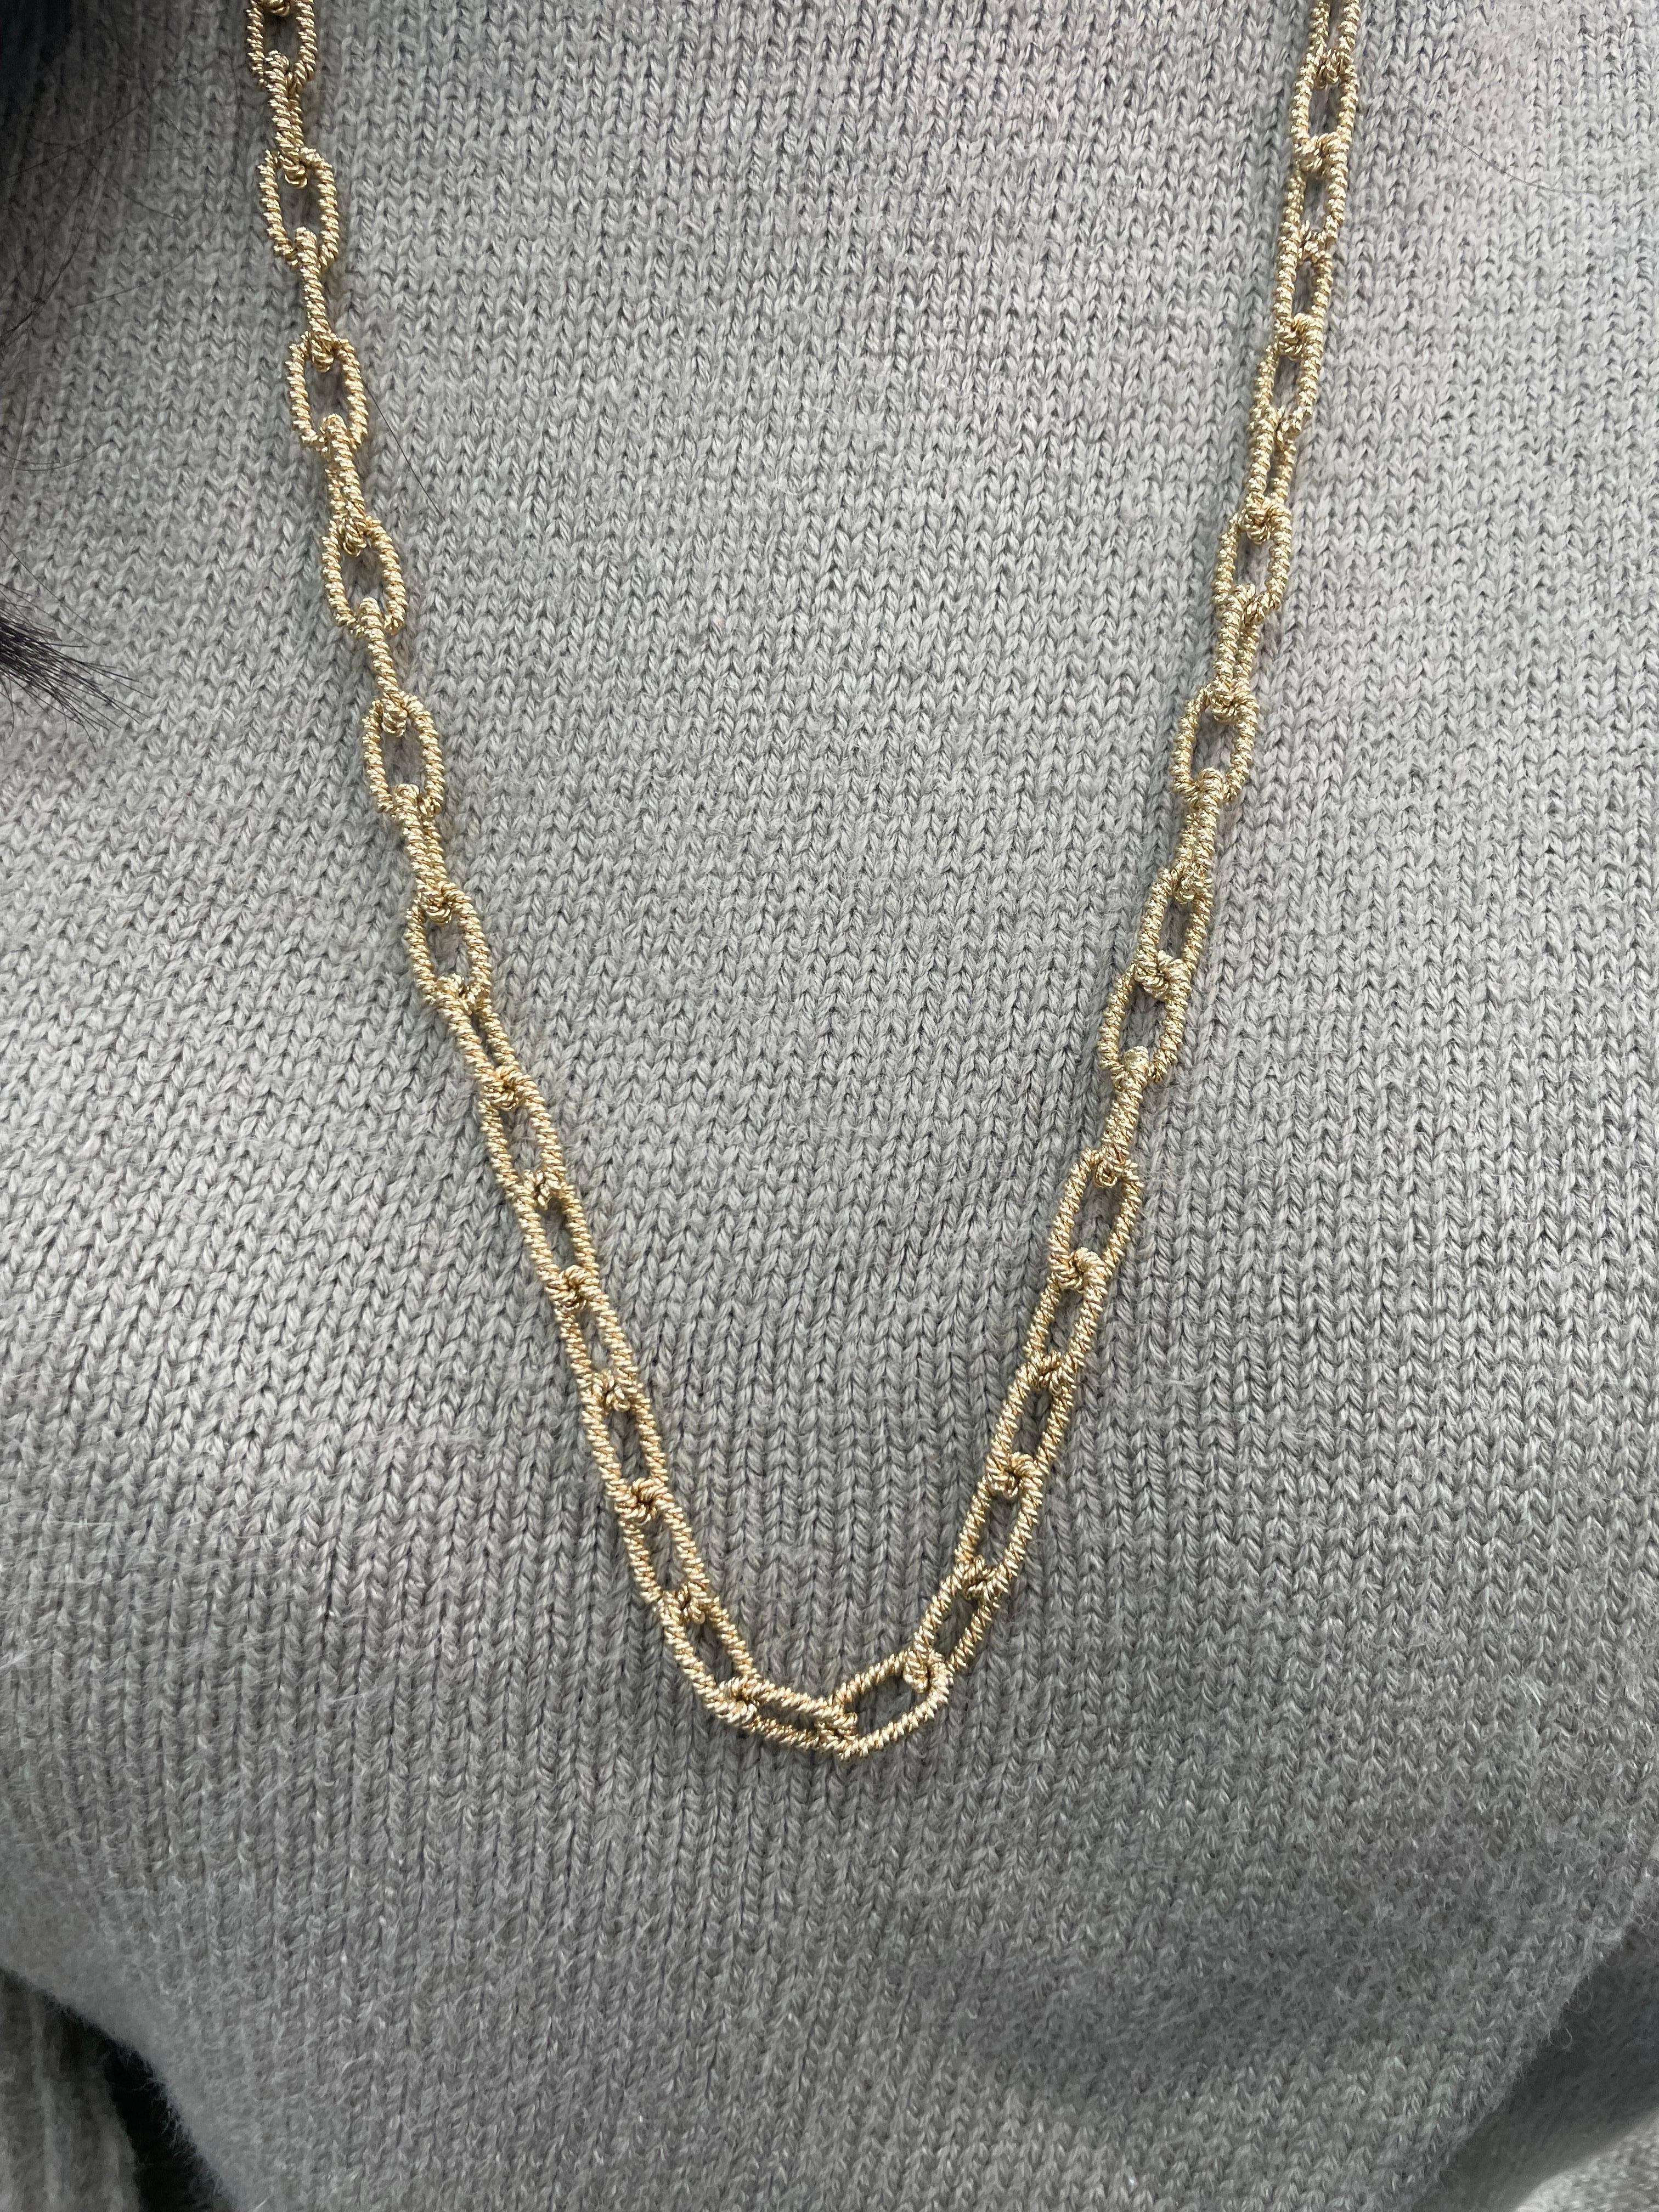 14 Karat Yellow Gold Heavy Rope Link Chain Necklace 84.5 Grams For Sale 8